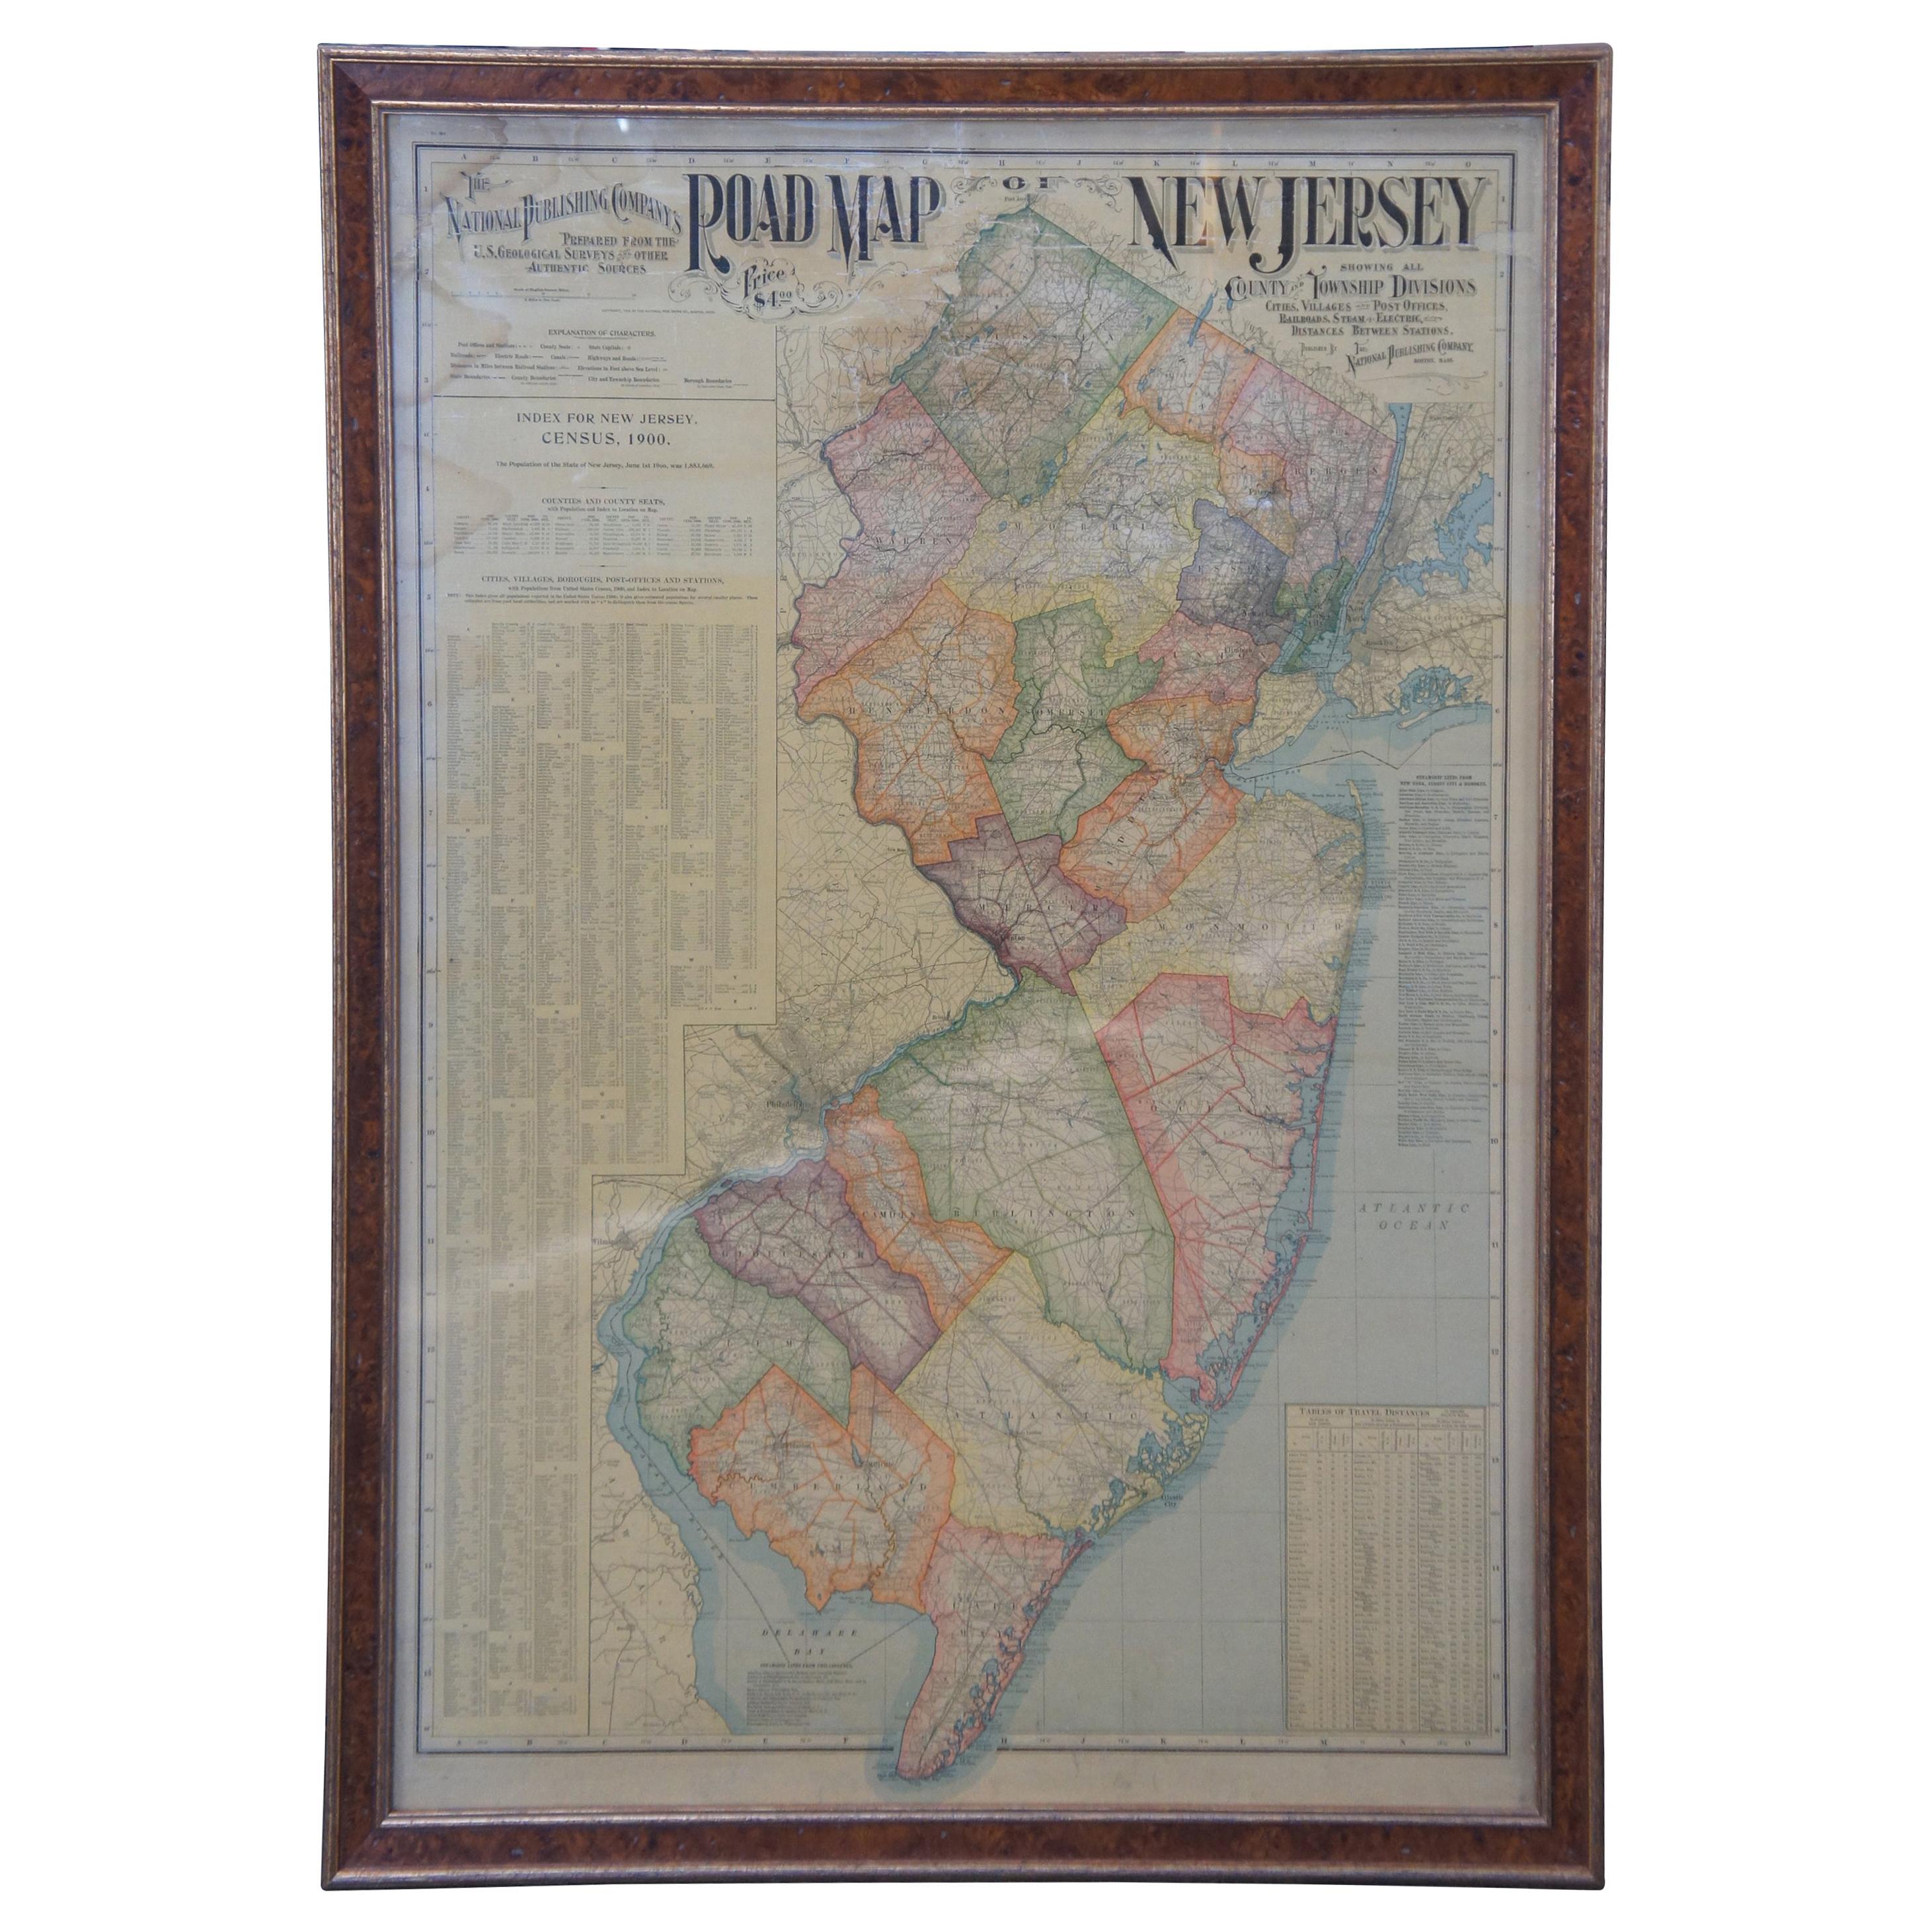 1903 Antique National Publishing Road Map of New Jersey Geological Survey